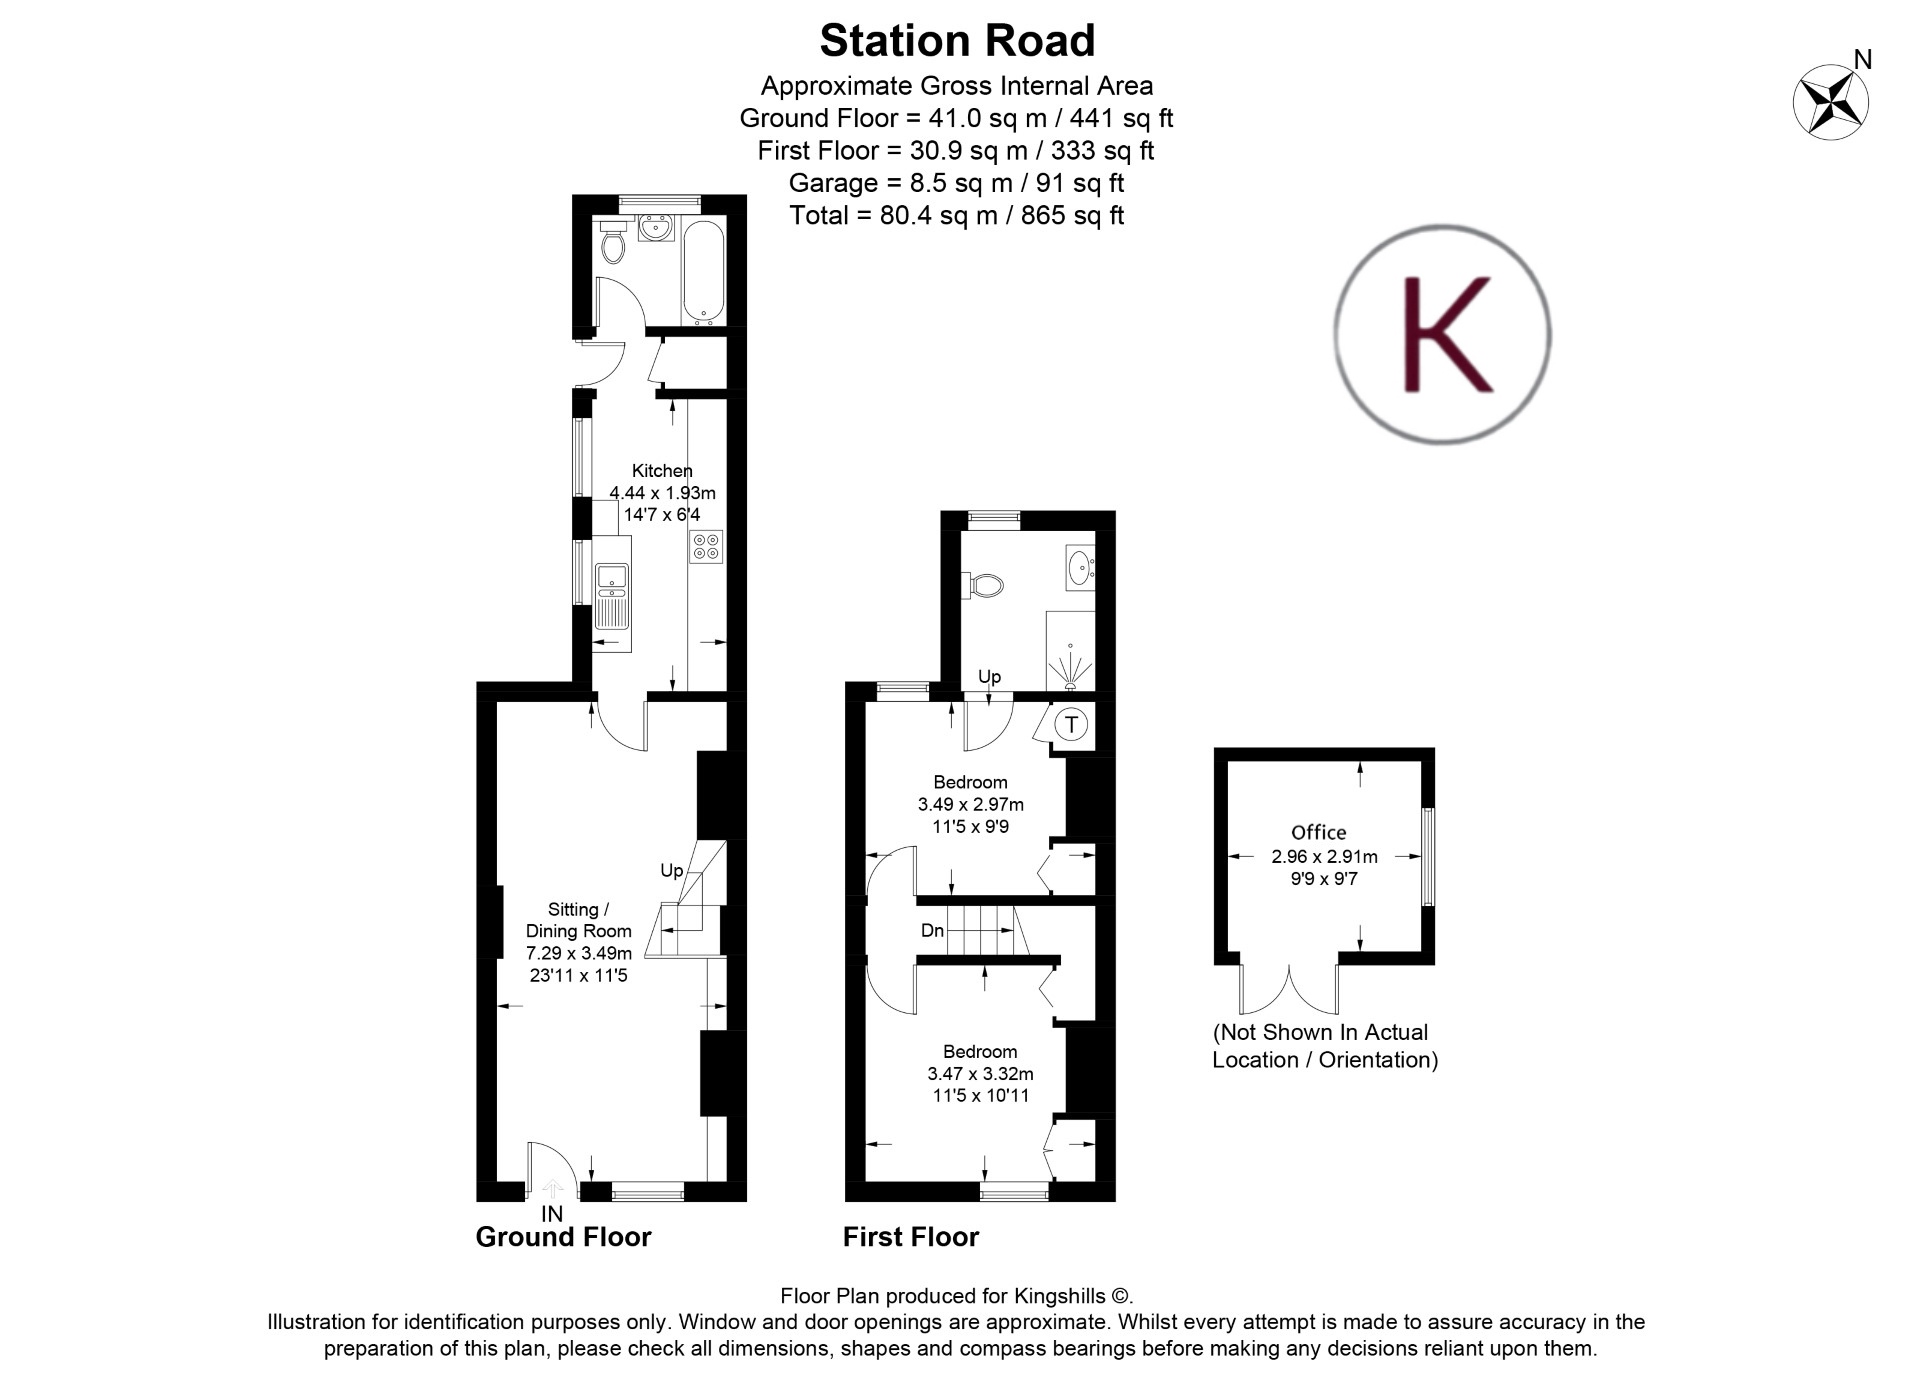 2 bed terraced house for sale in Station Road, Marlow - Property floorplan